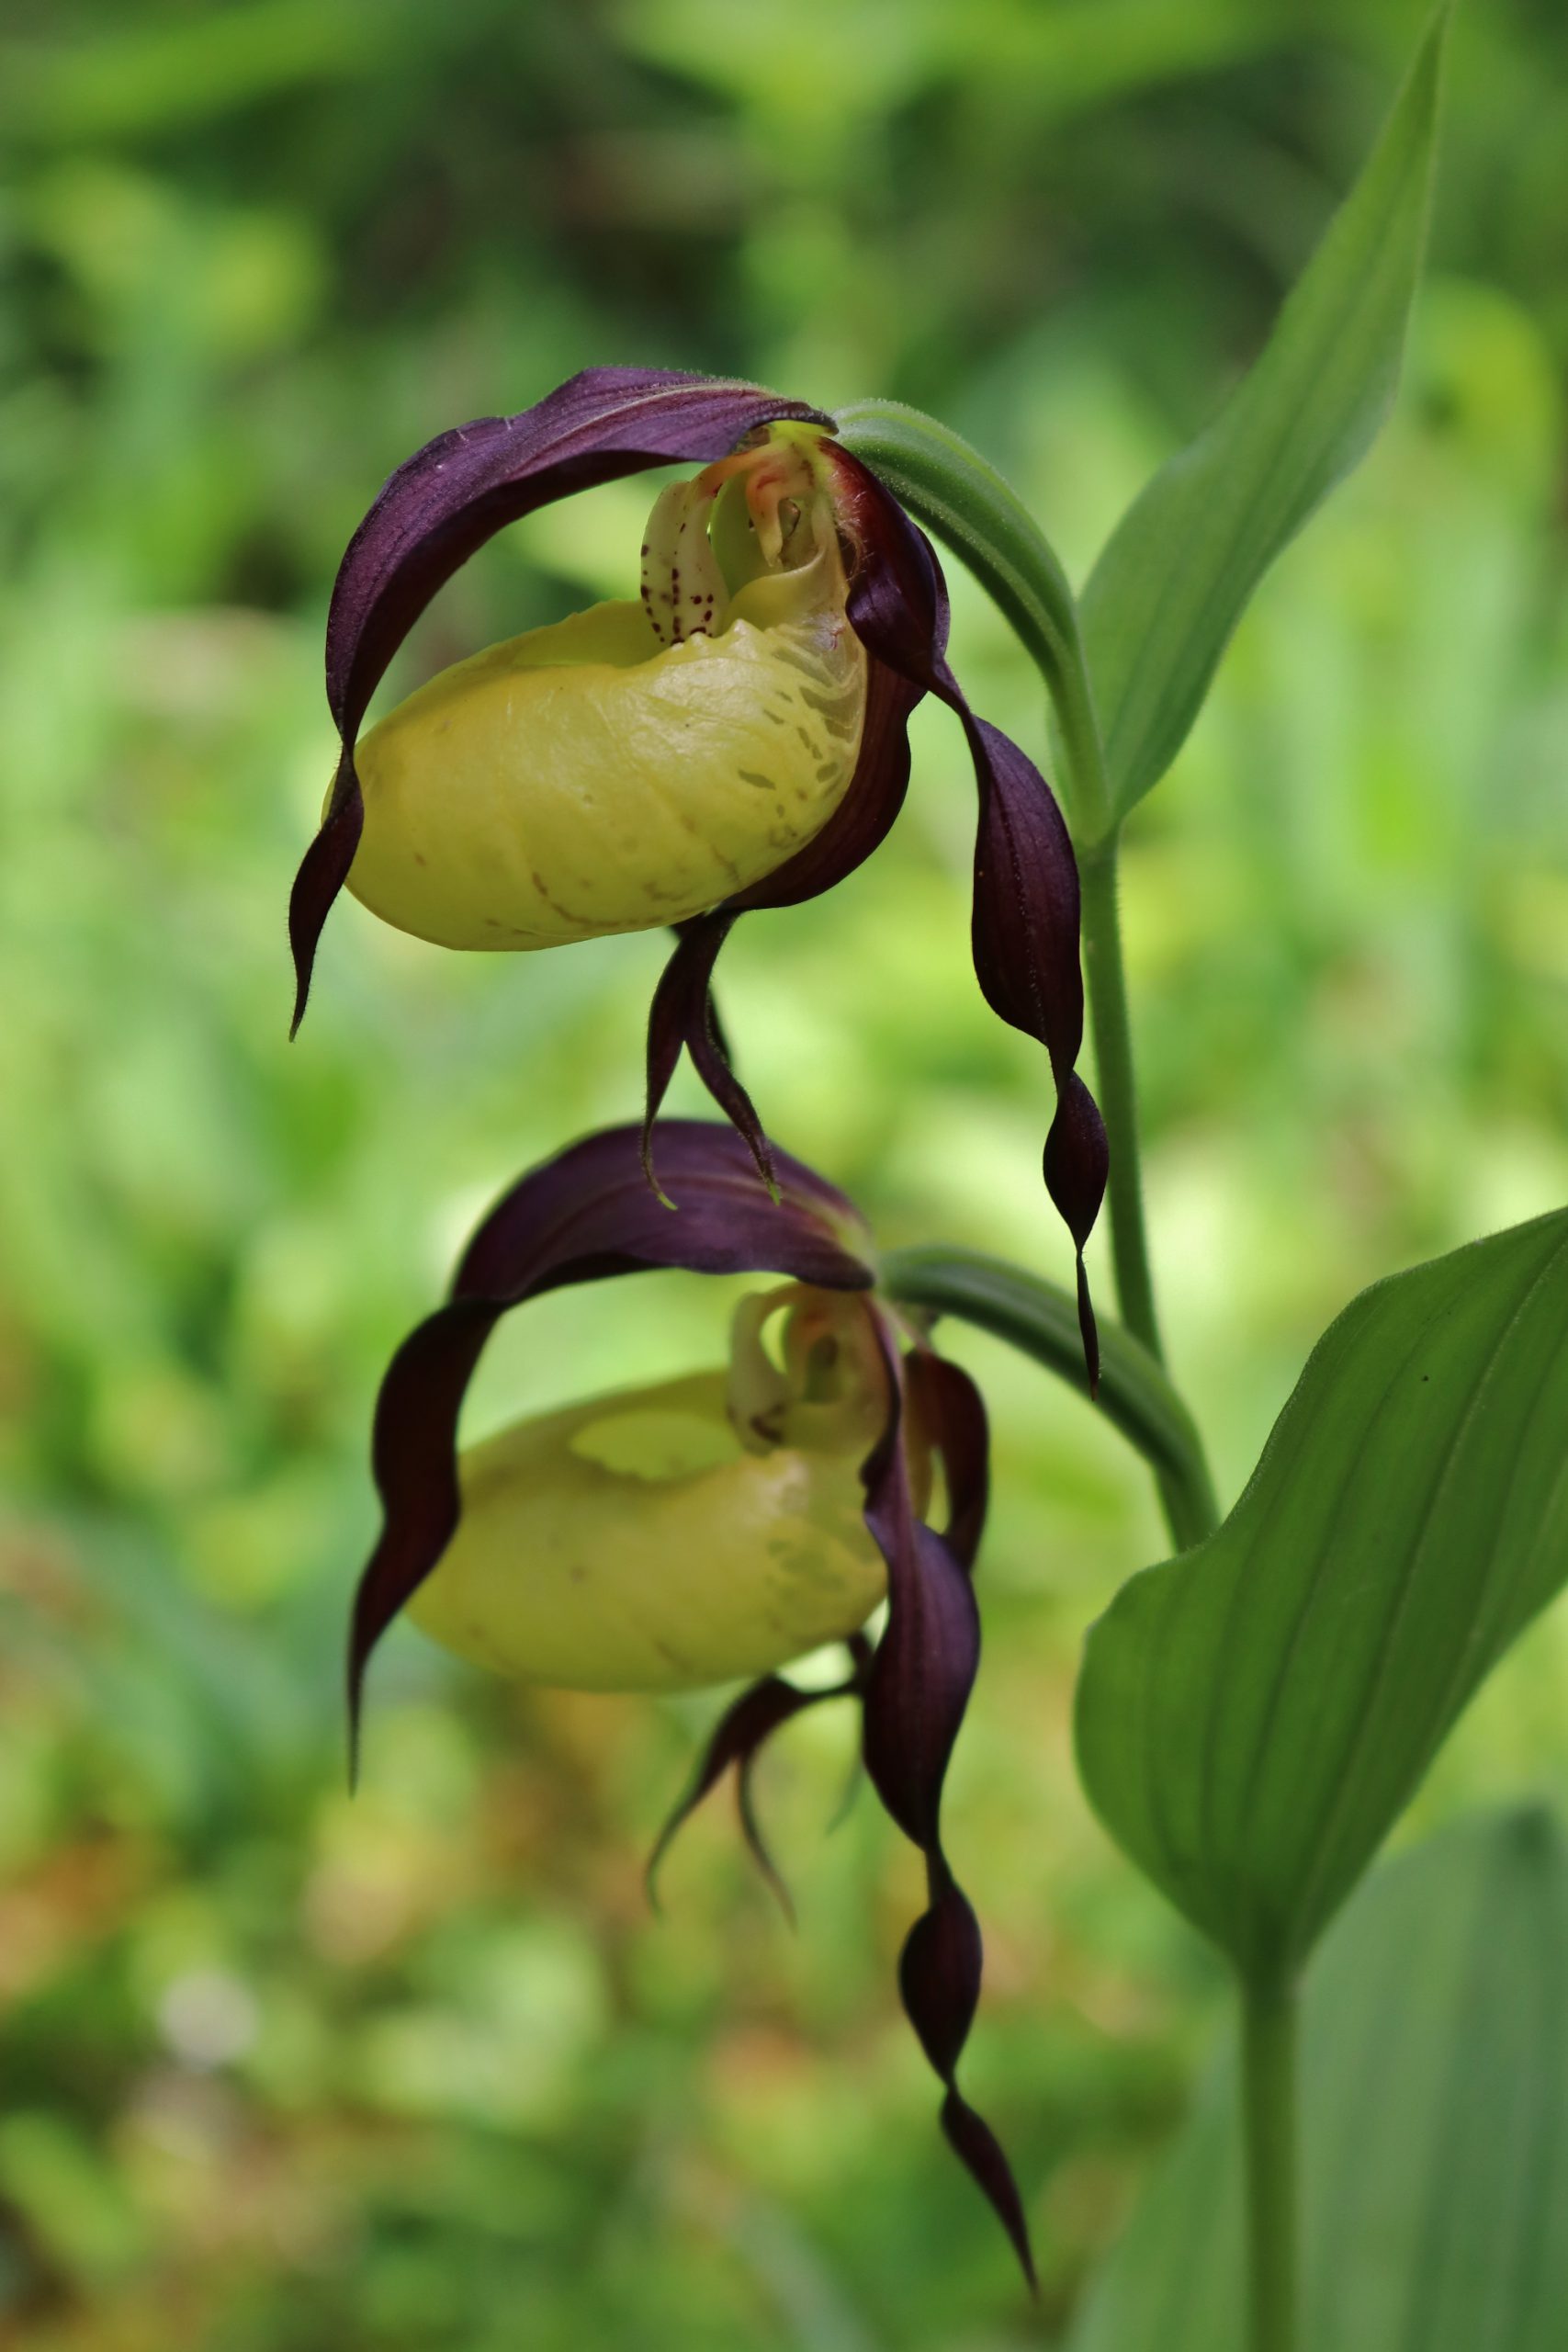 A group of the lady's-slipper orchid